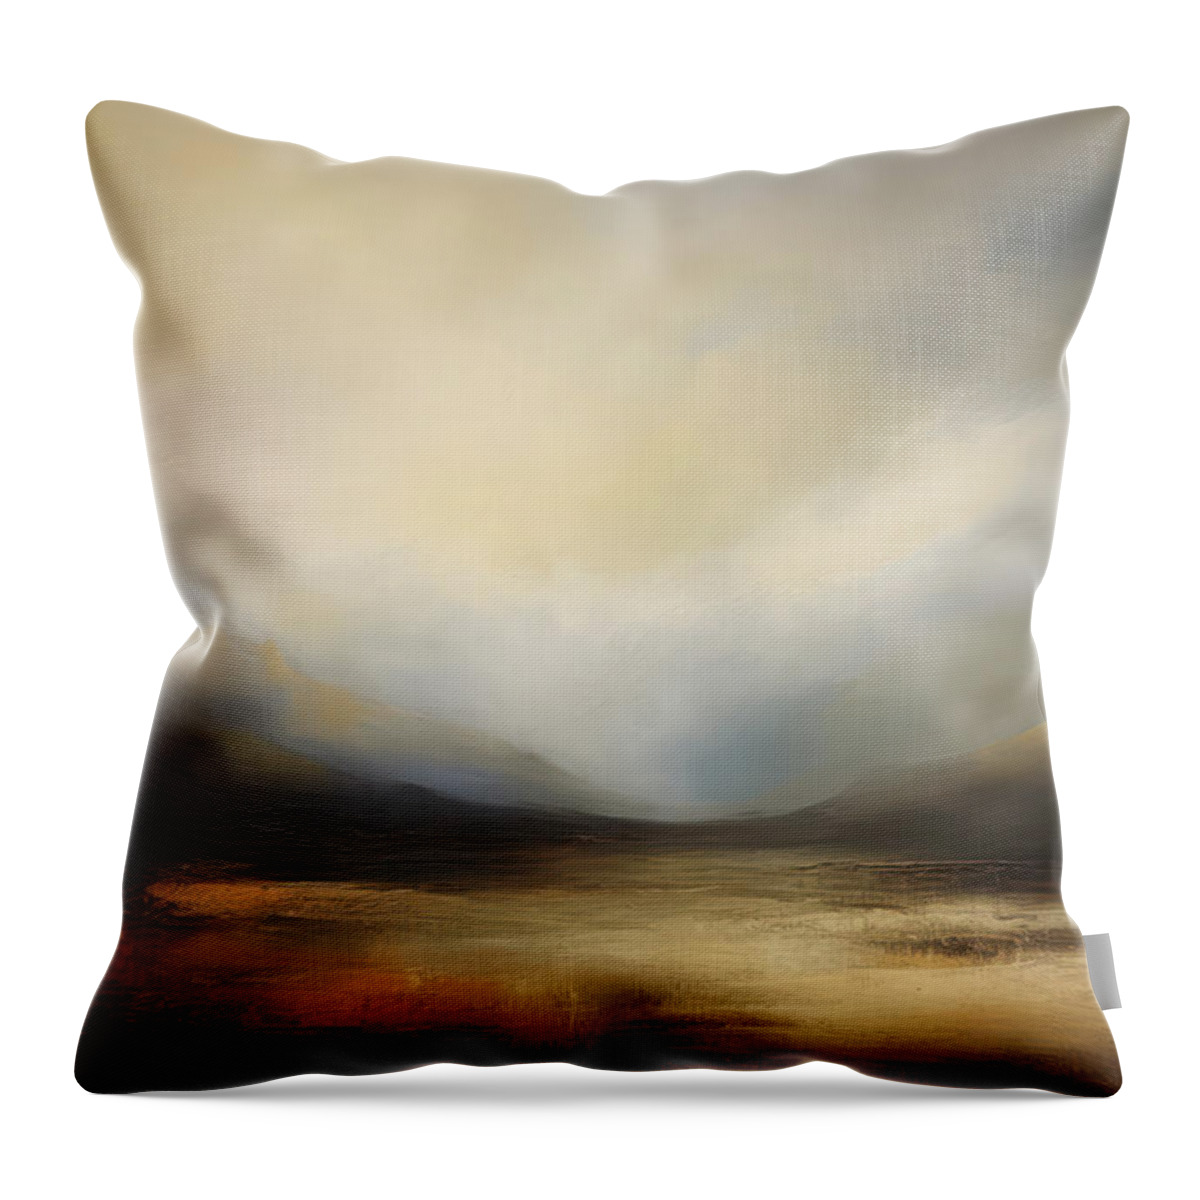 Wide Open Spaces Throw Pillow featuring the painting Wide Open Spaces Desert Dreams 6 by Jai Johnson